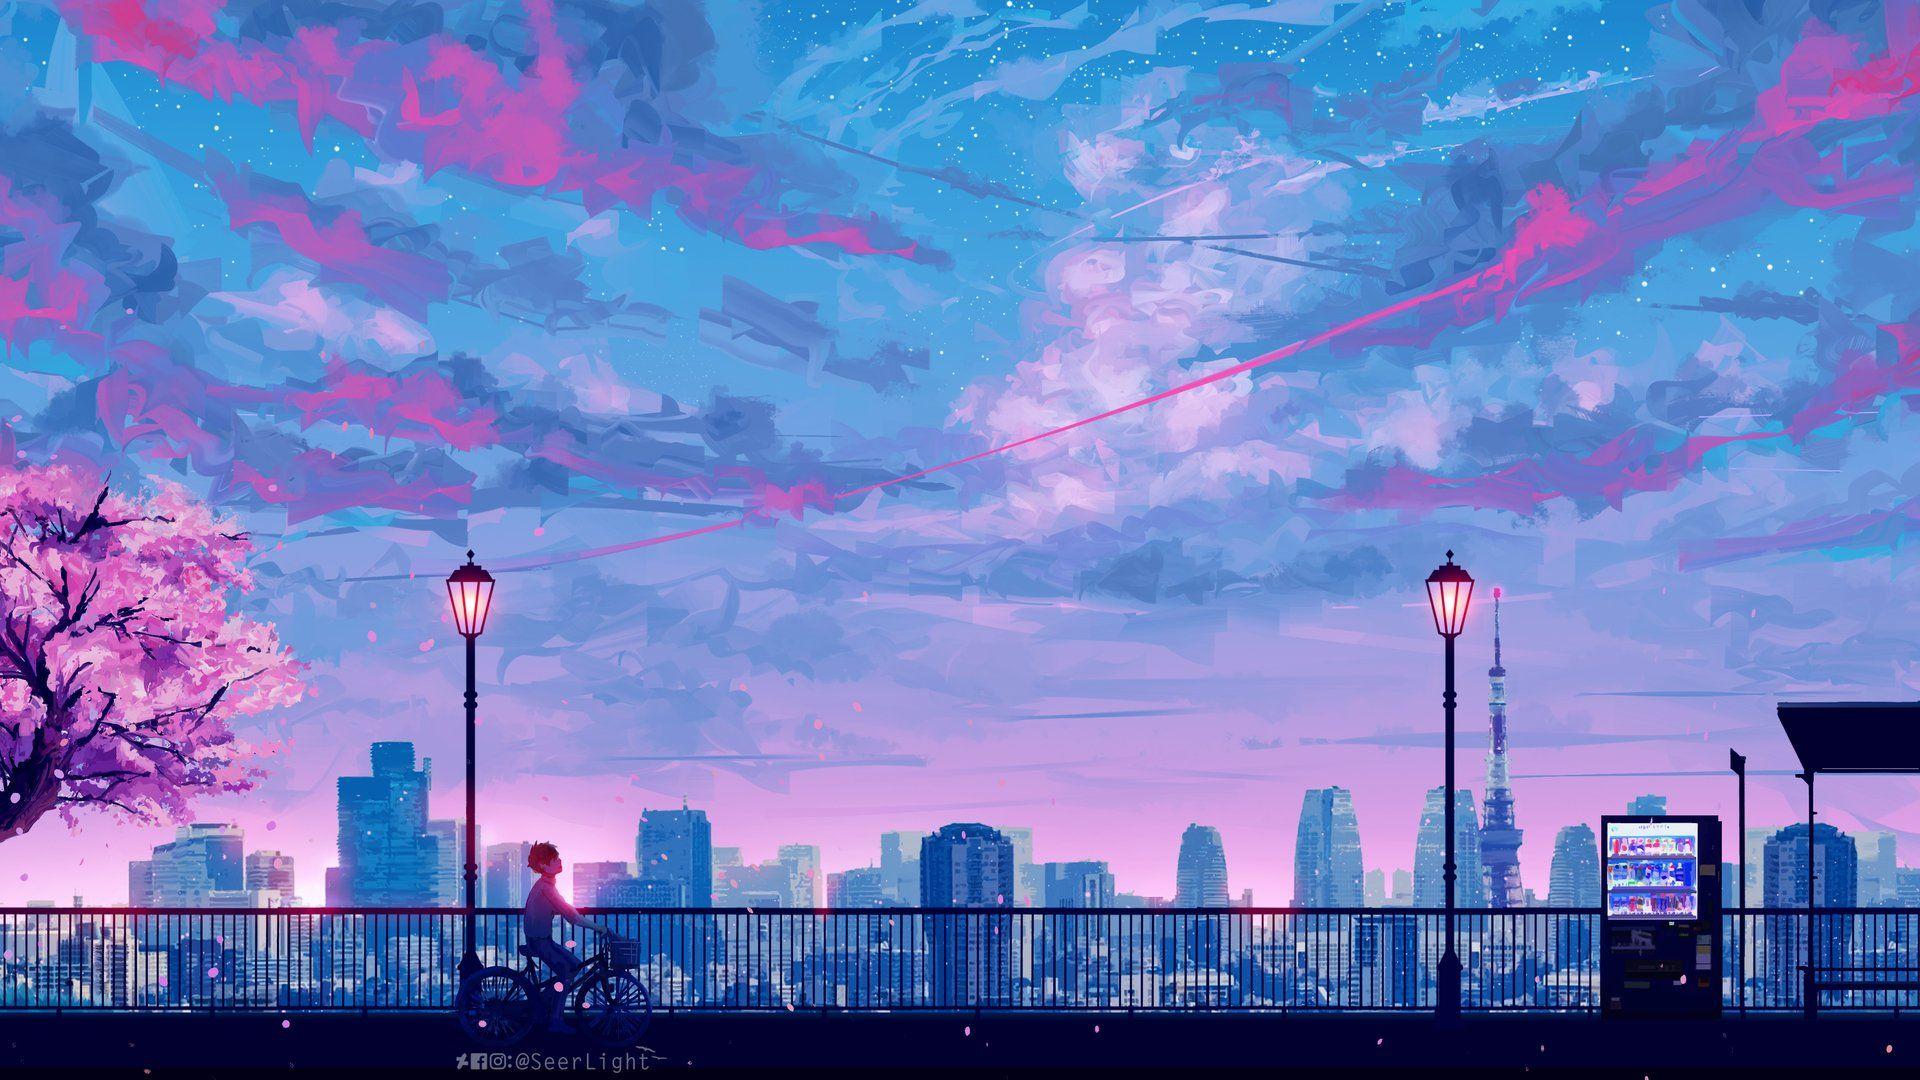 Pink Aesthetic 90s Anime Wallpapers Top Free Pink Aesthetic 90s Anime Backgrounds